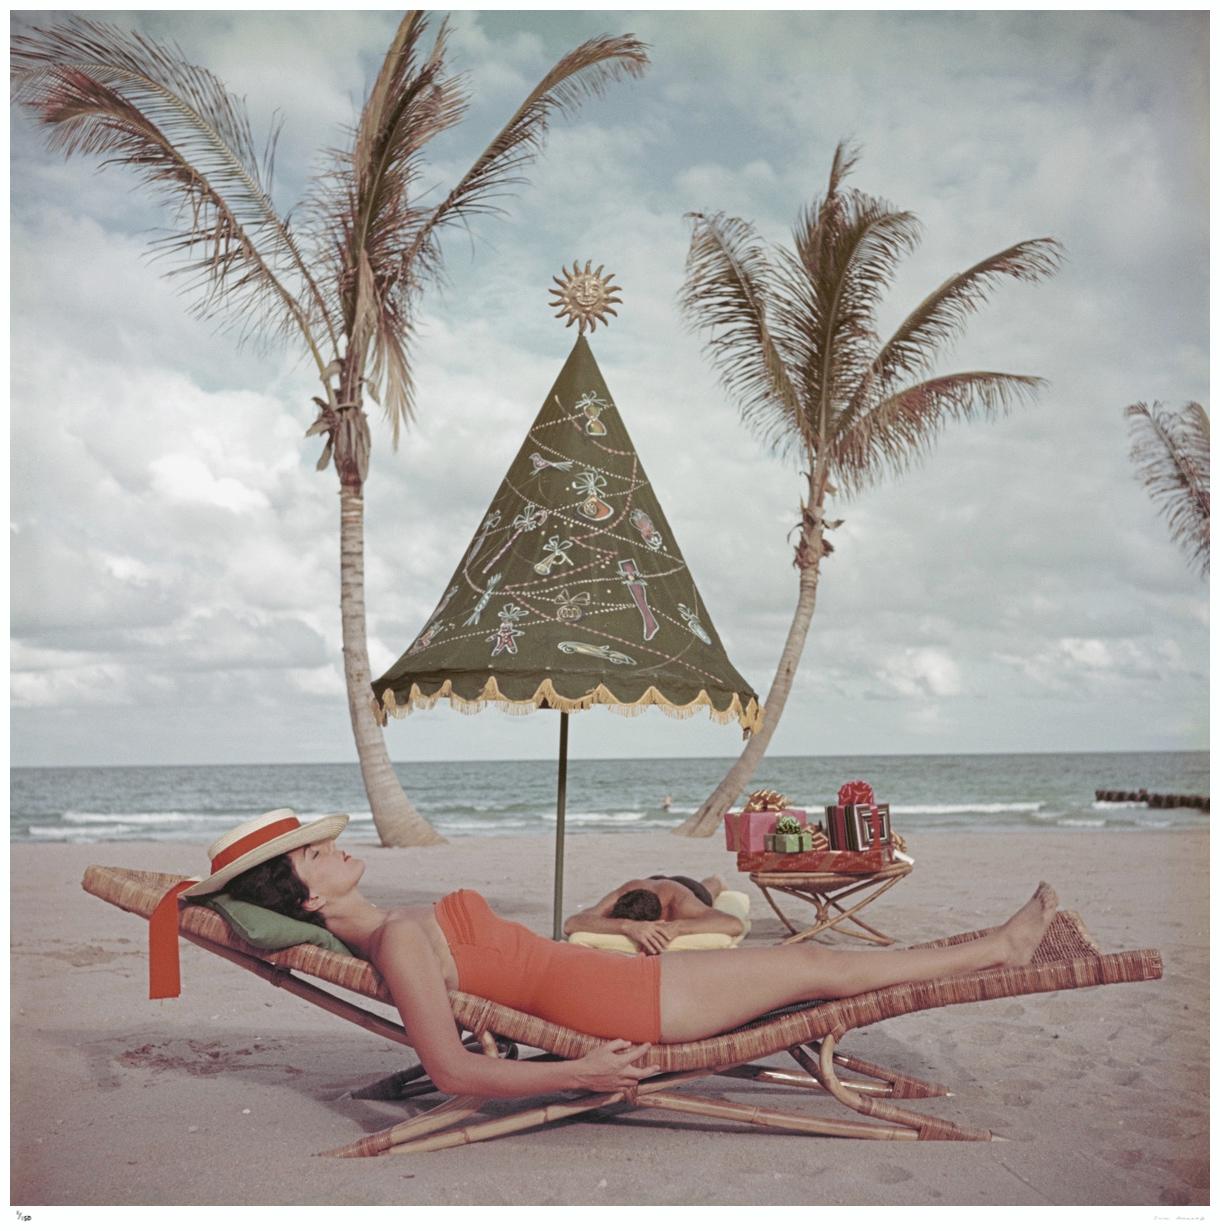 Slim Aarons 'Palm Beach Idyll' Estate Stamped Edition 
A couple sunbathe by the sea at Palm Beach Florida 1955 USA (Photo by Slim Aarons). 
This photograph epitomises the travel style and glamour of the period's wealthy and famous, beautifully